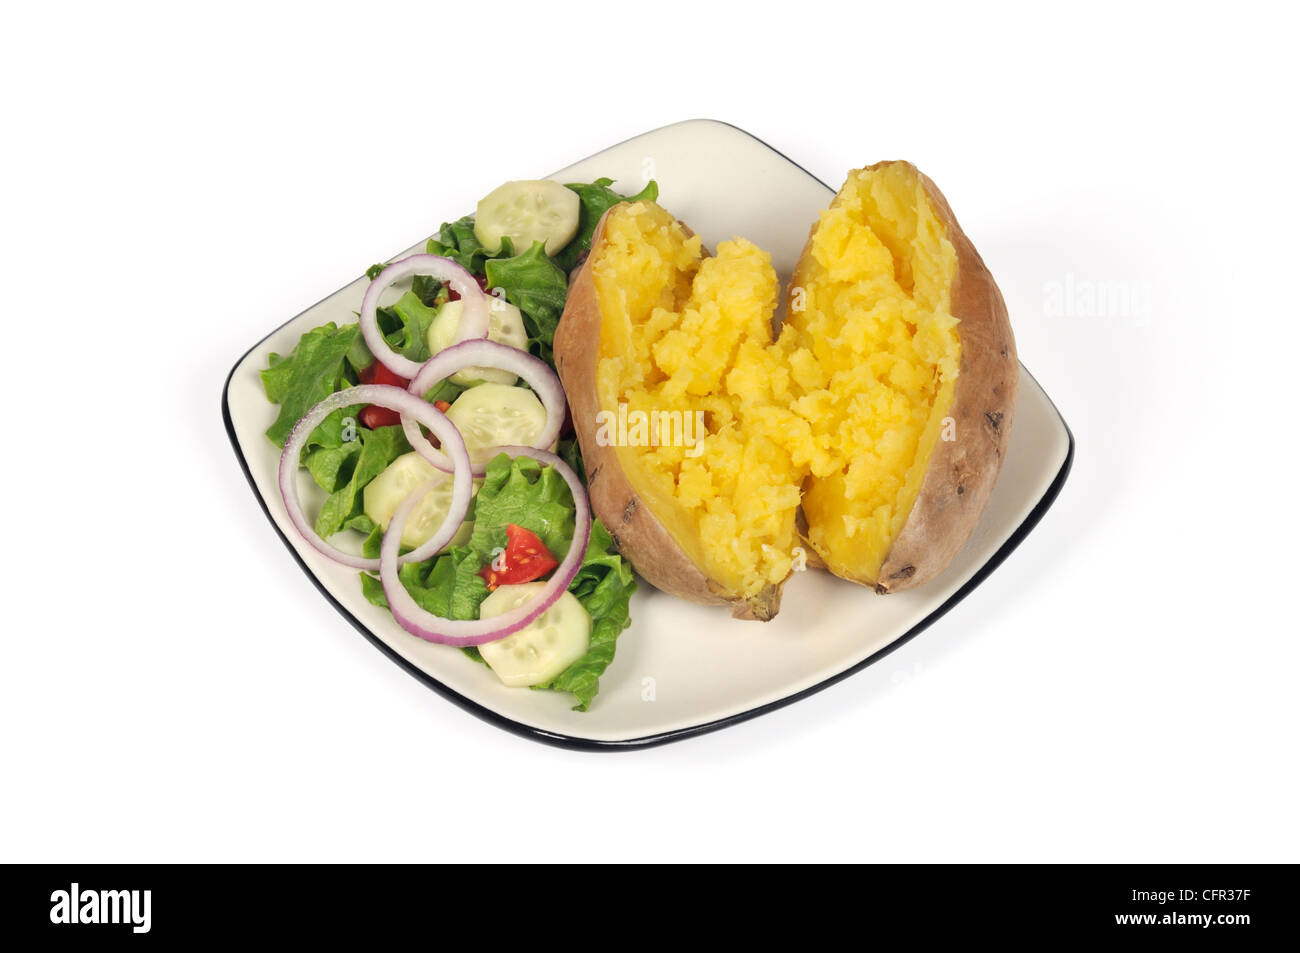 Baked sweet potato with melted butter with green garden salad on a plate on white background cut out Stock Photo